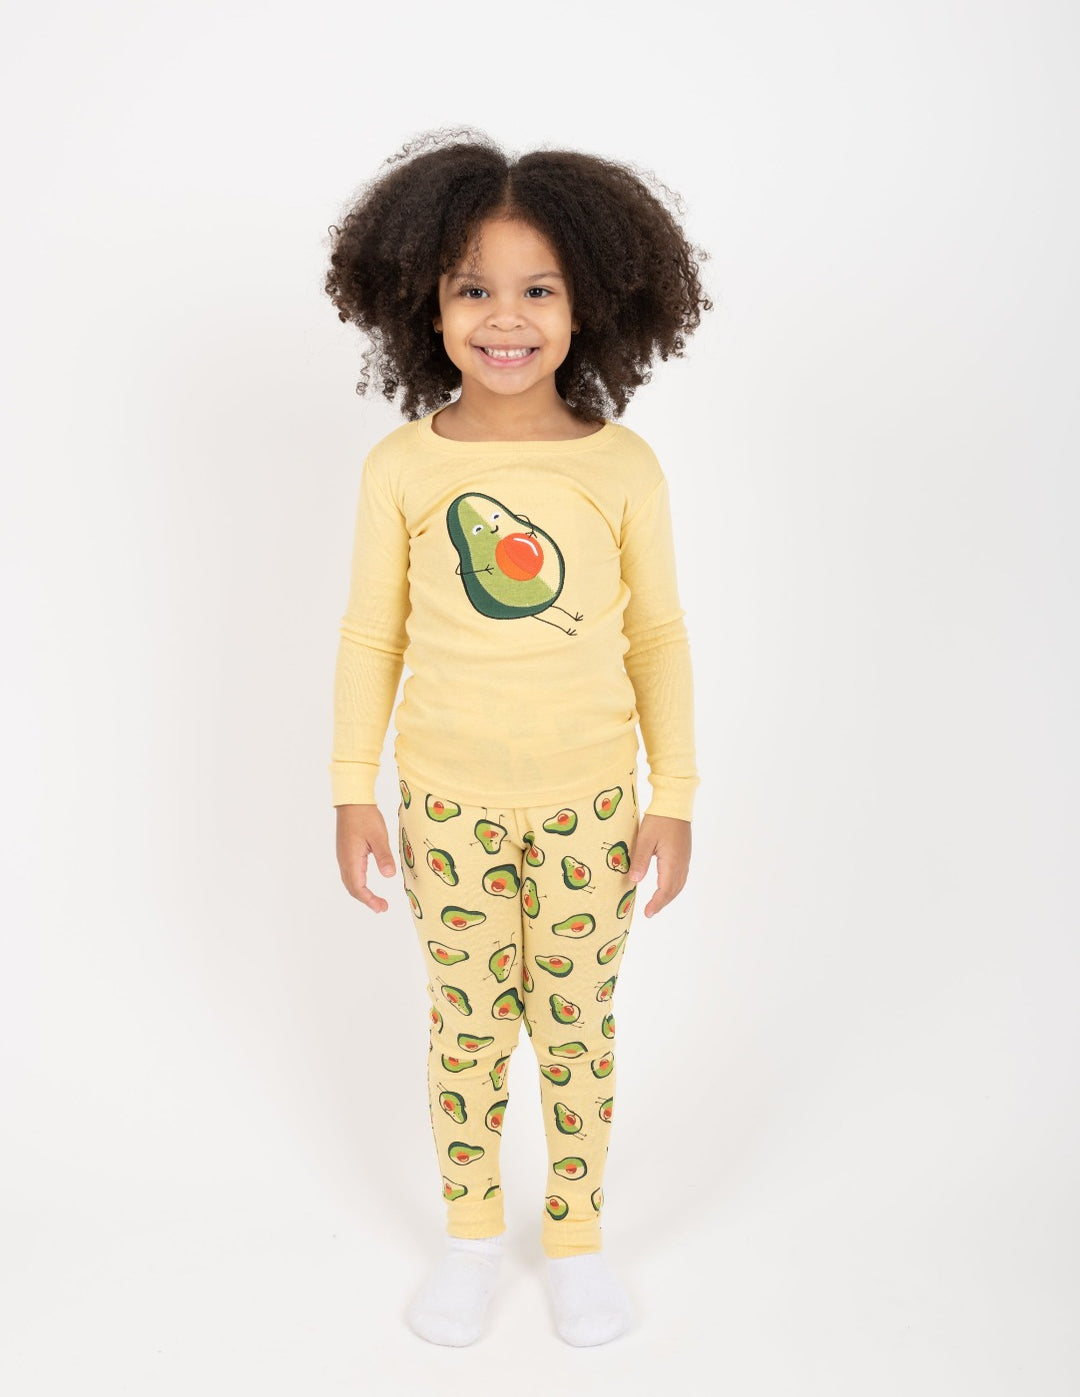 Avocado Cotton Pajama Set For Women Comfortable Pep Sleepwear For Ladies  And Home Clothes From Lu006, $19.95